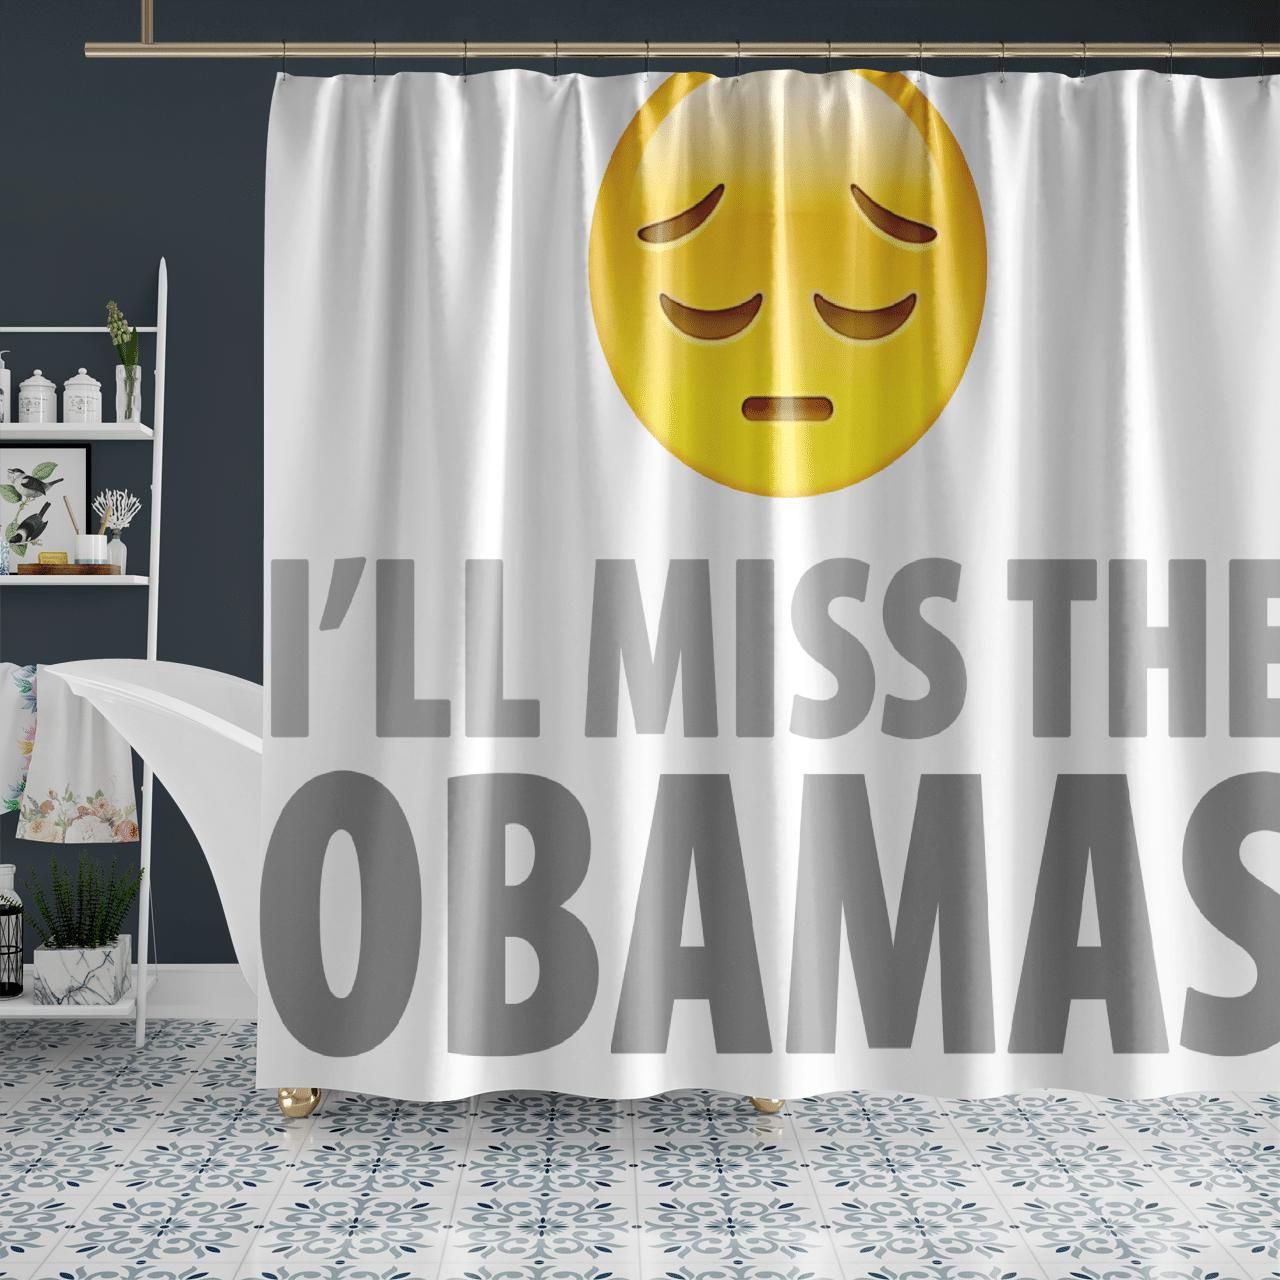 I Will Miss The Obames Shower Curtain